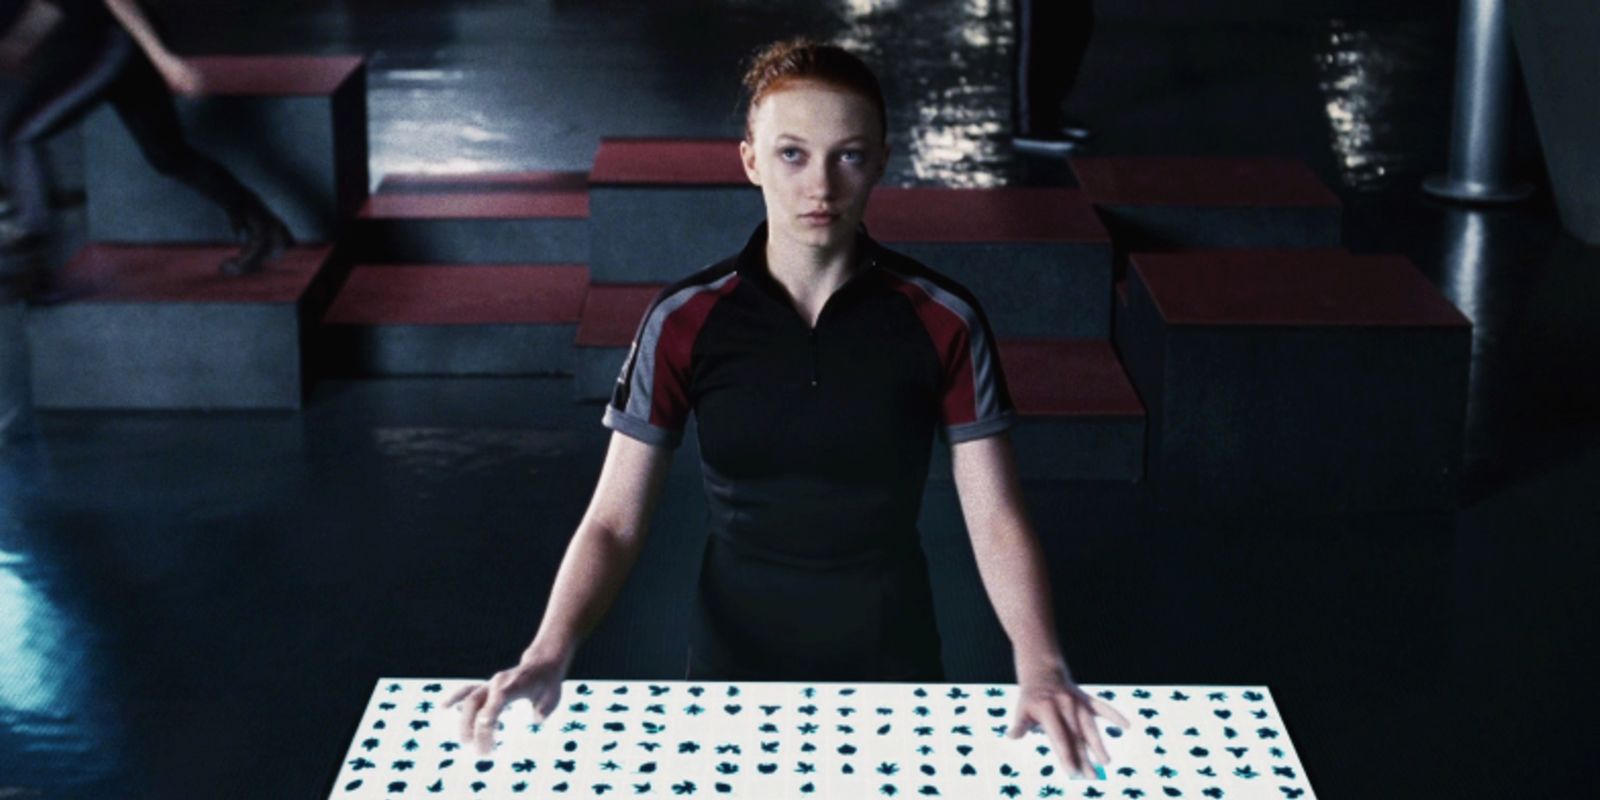 Foxface on a computer in The Hunger Games.